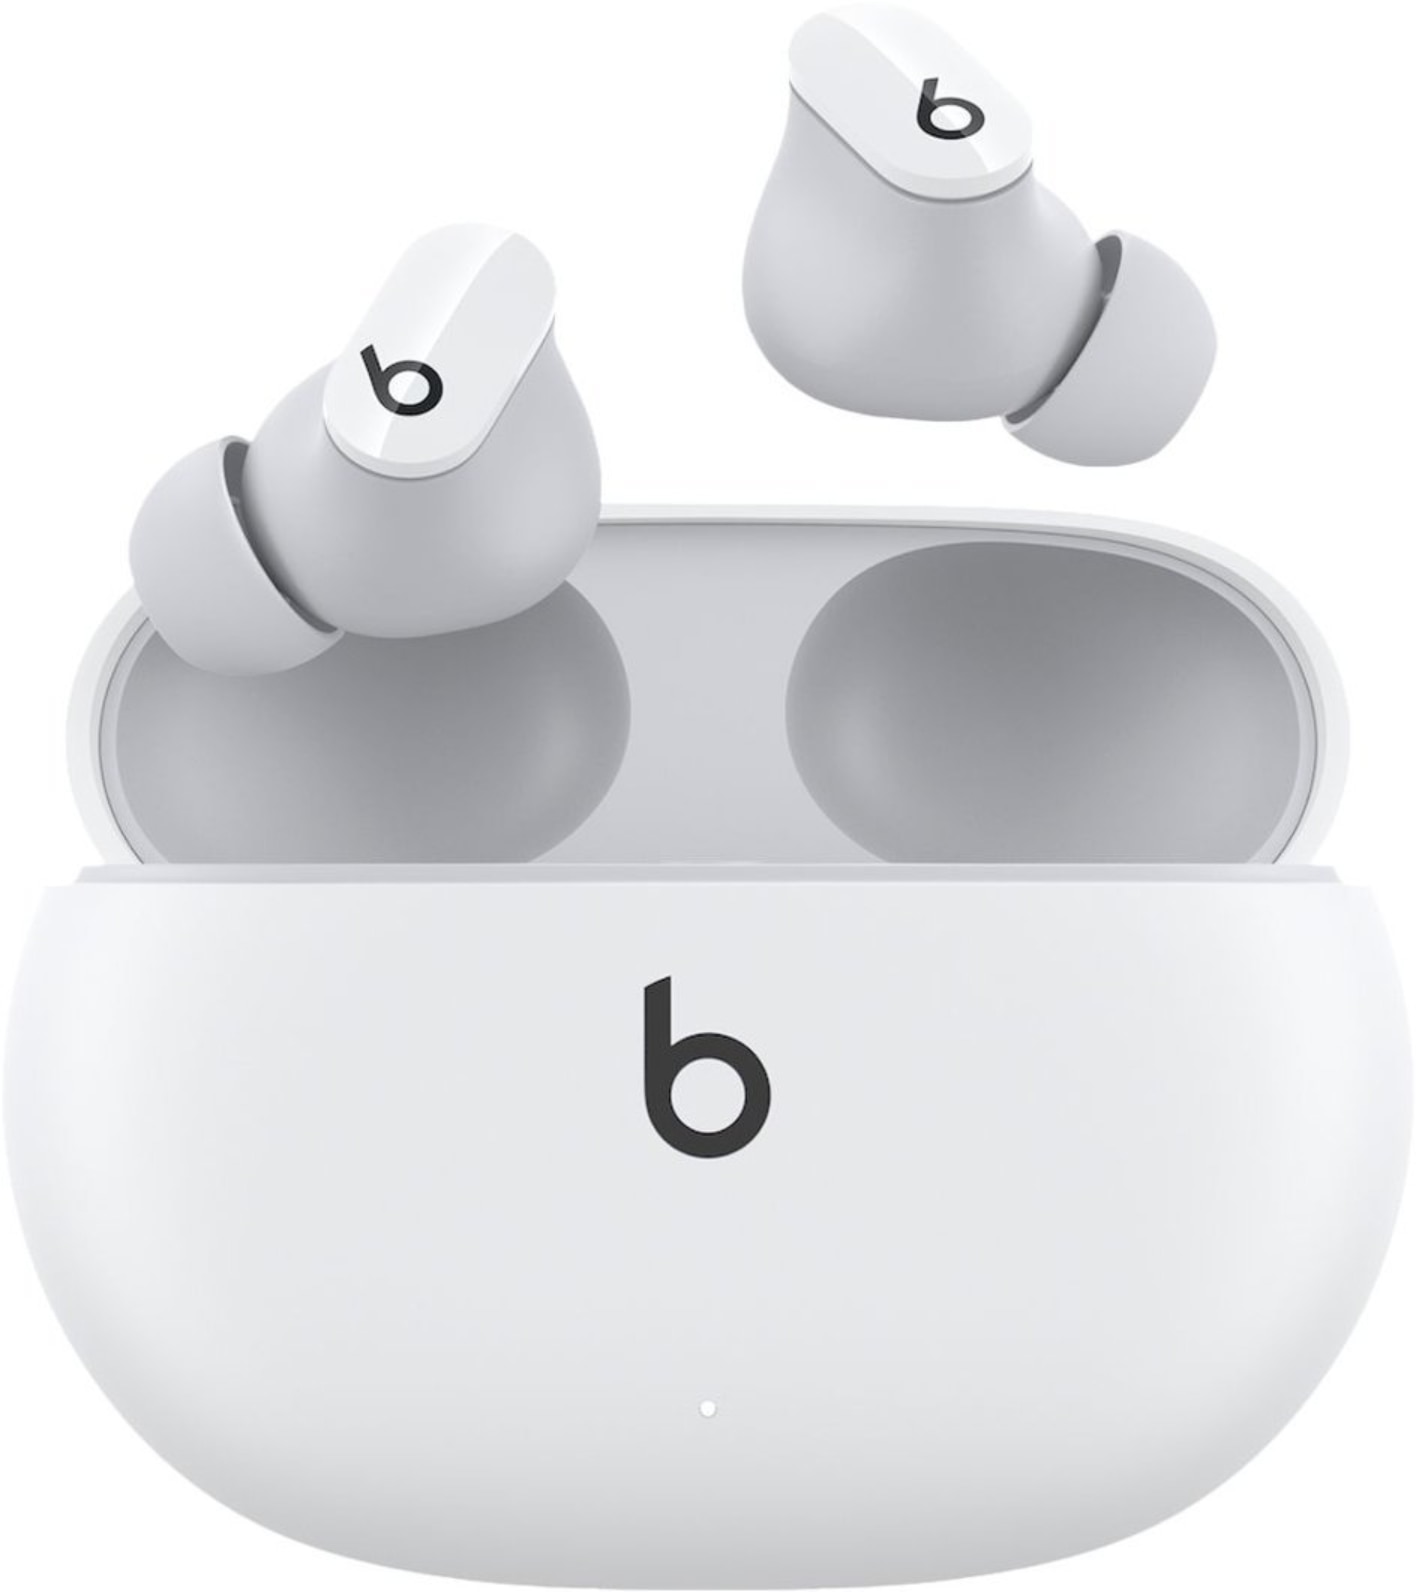 Beats Studio Buds Totally Wireless Earbuds White